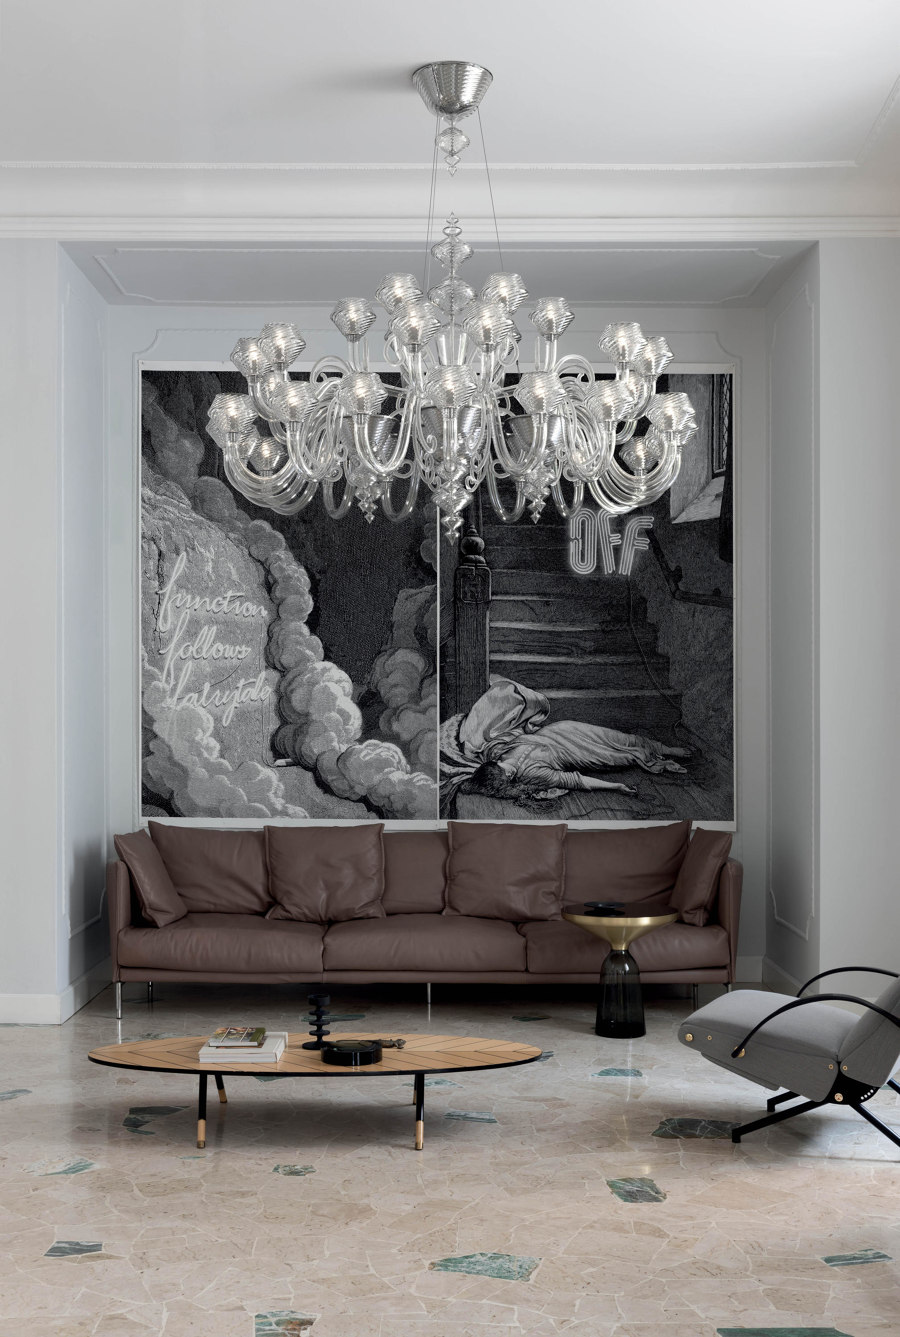 Statement pieces: chandeliers that do the talking | News